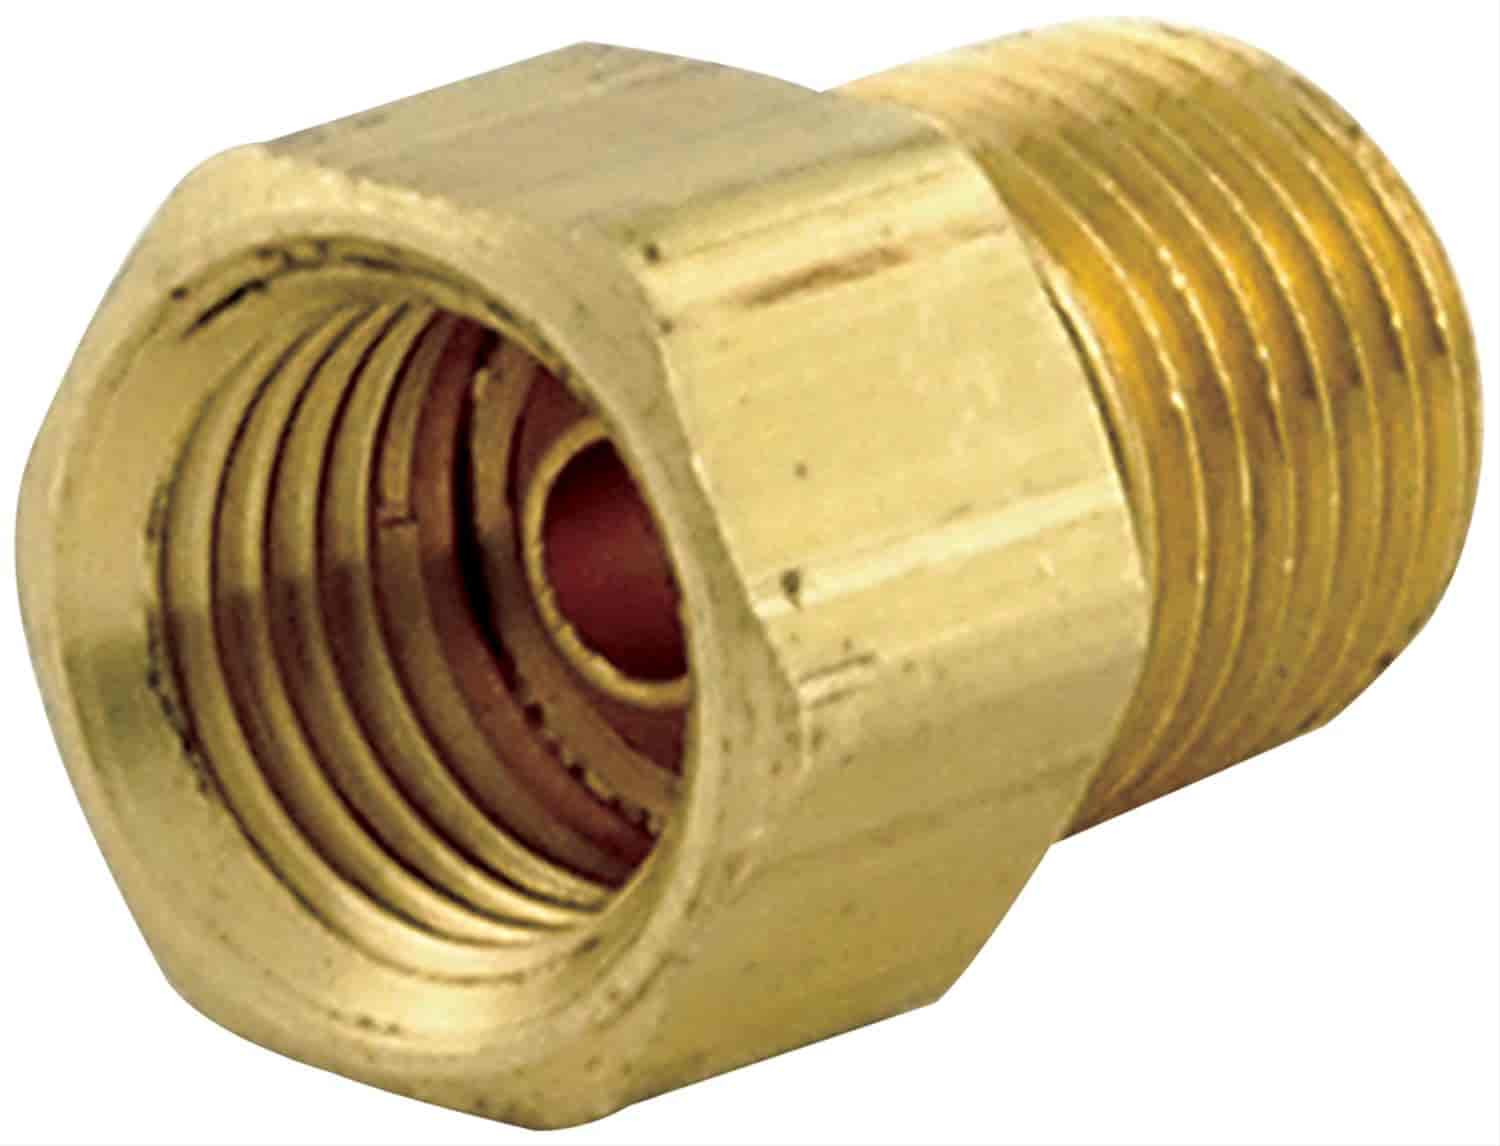 JEGS 555-63077: Brass Adapter Fitting, 3/8 in.-24 Male Thread for 3/16 in.  Brake Line, 7/16 in.-24 Female Thread Inverted Flare for 1/4 in. Brake  Line, brass adapter fitting 